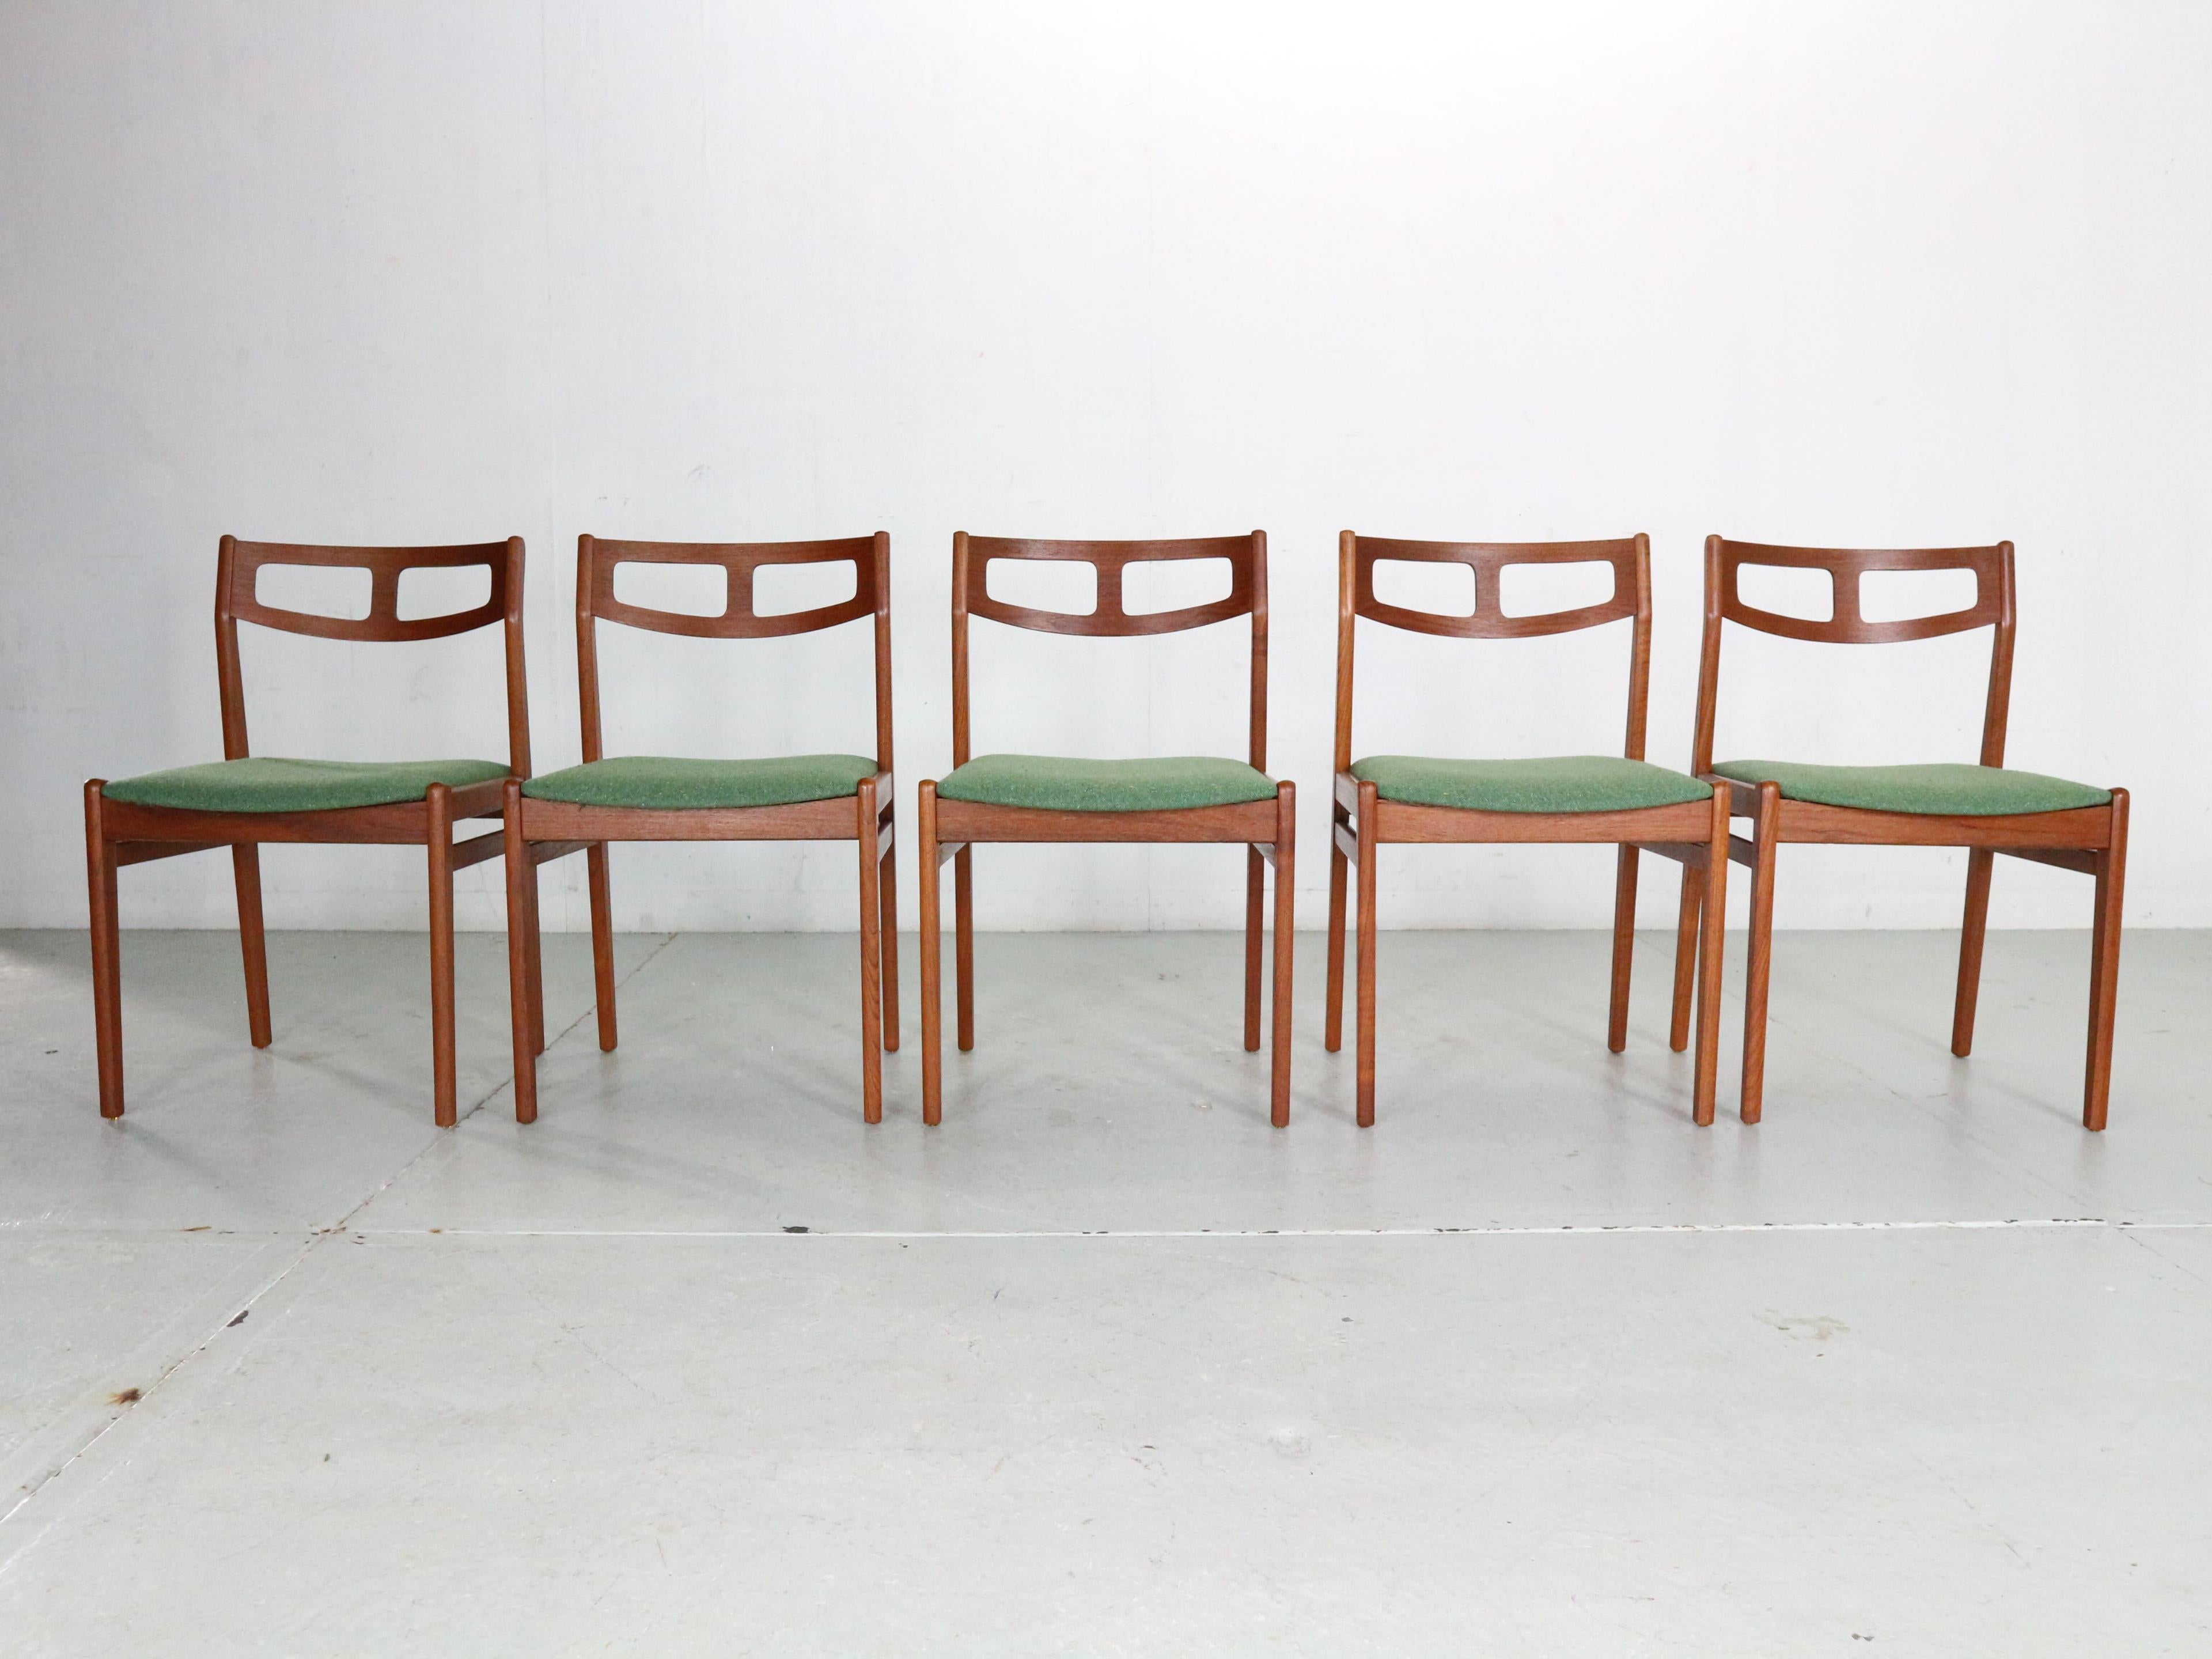 Scandinavian modern period set off 5 dining room chairs made in 1960s, Denmark.
The chairs has been newly reupholstered with green wool furniture fabric. 
Frame is made of curved teak wood. Comfortable seating and back rest.
Has been